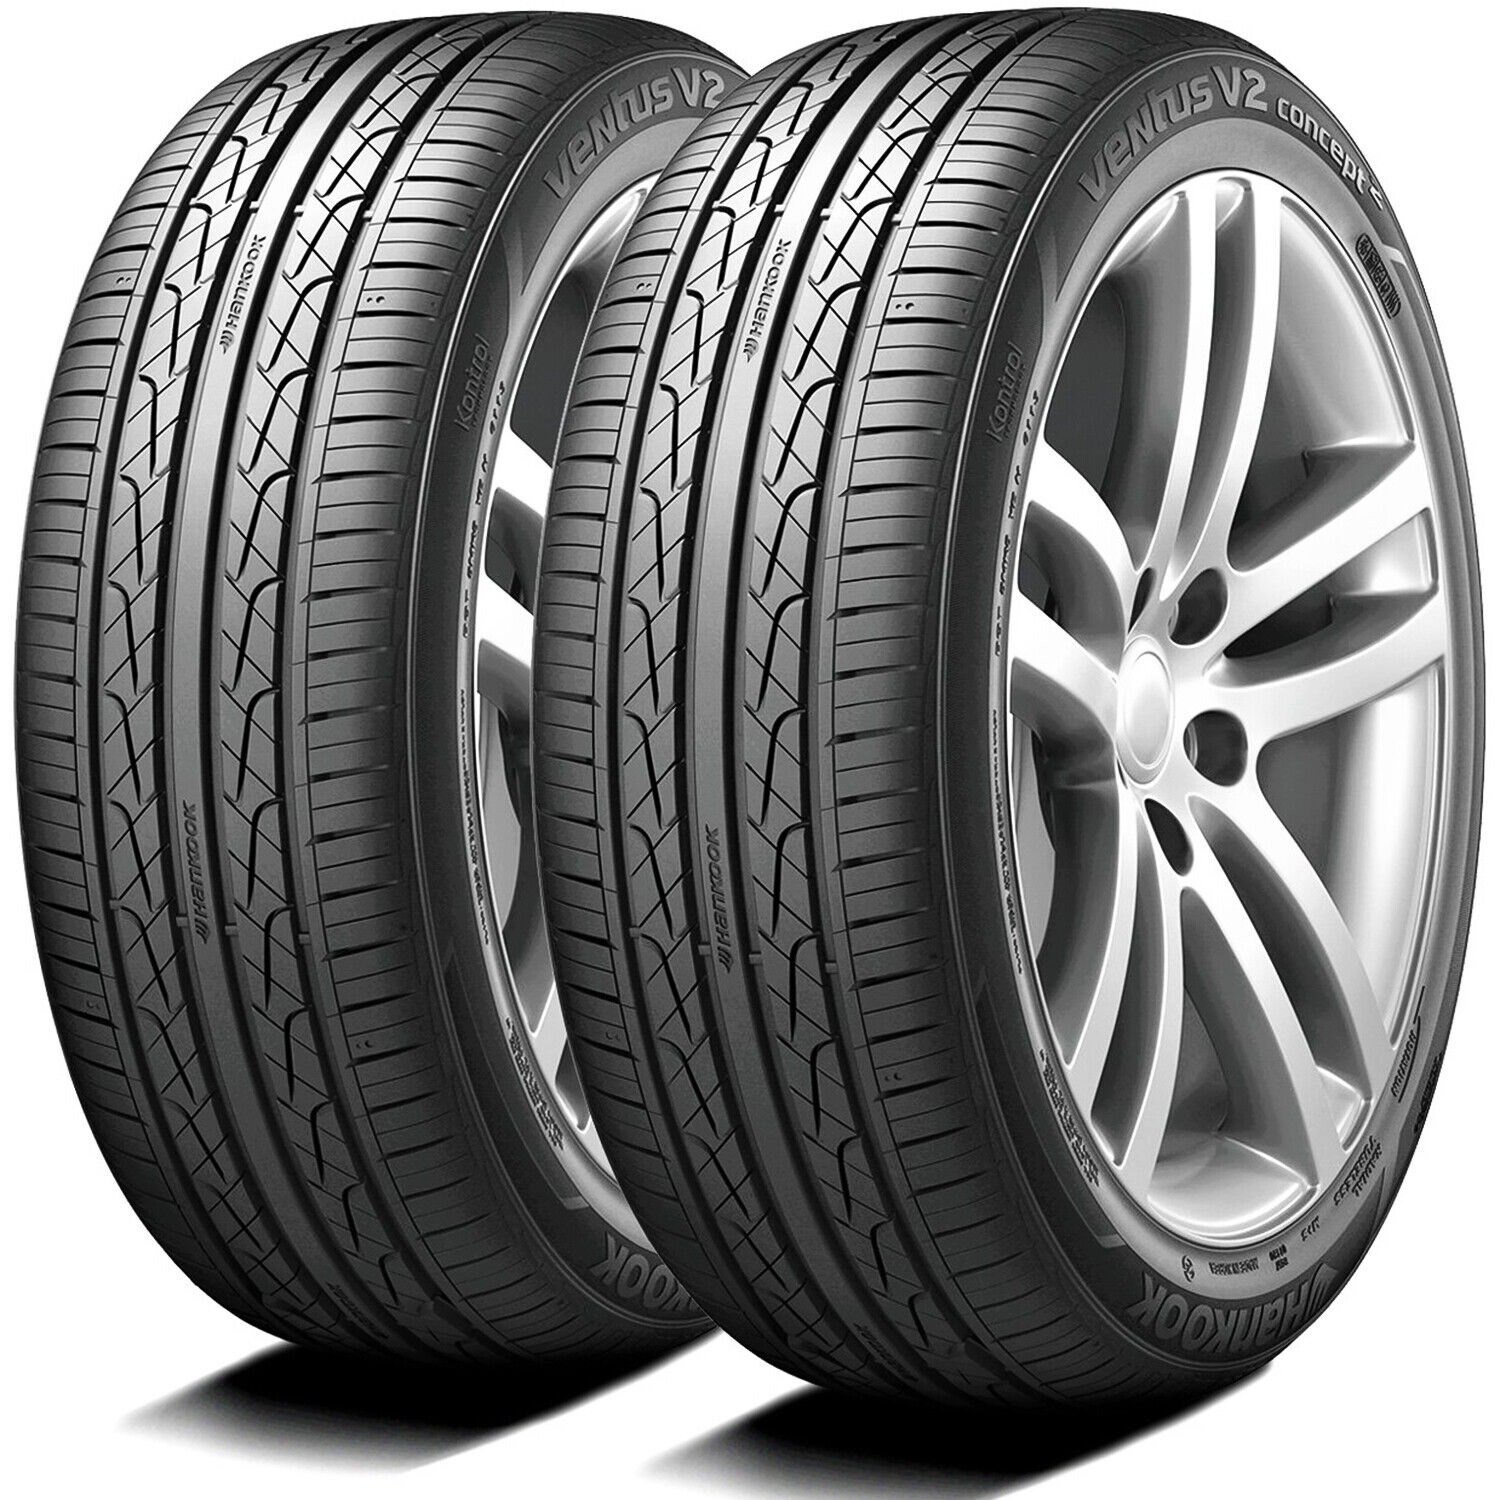 2 Tires Hankook Ventus V2 Concept2 195/50R15 82H AS Performance A/S